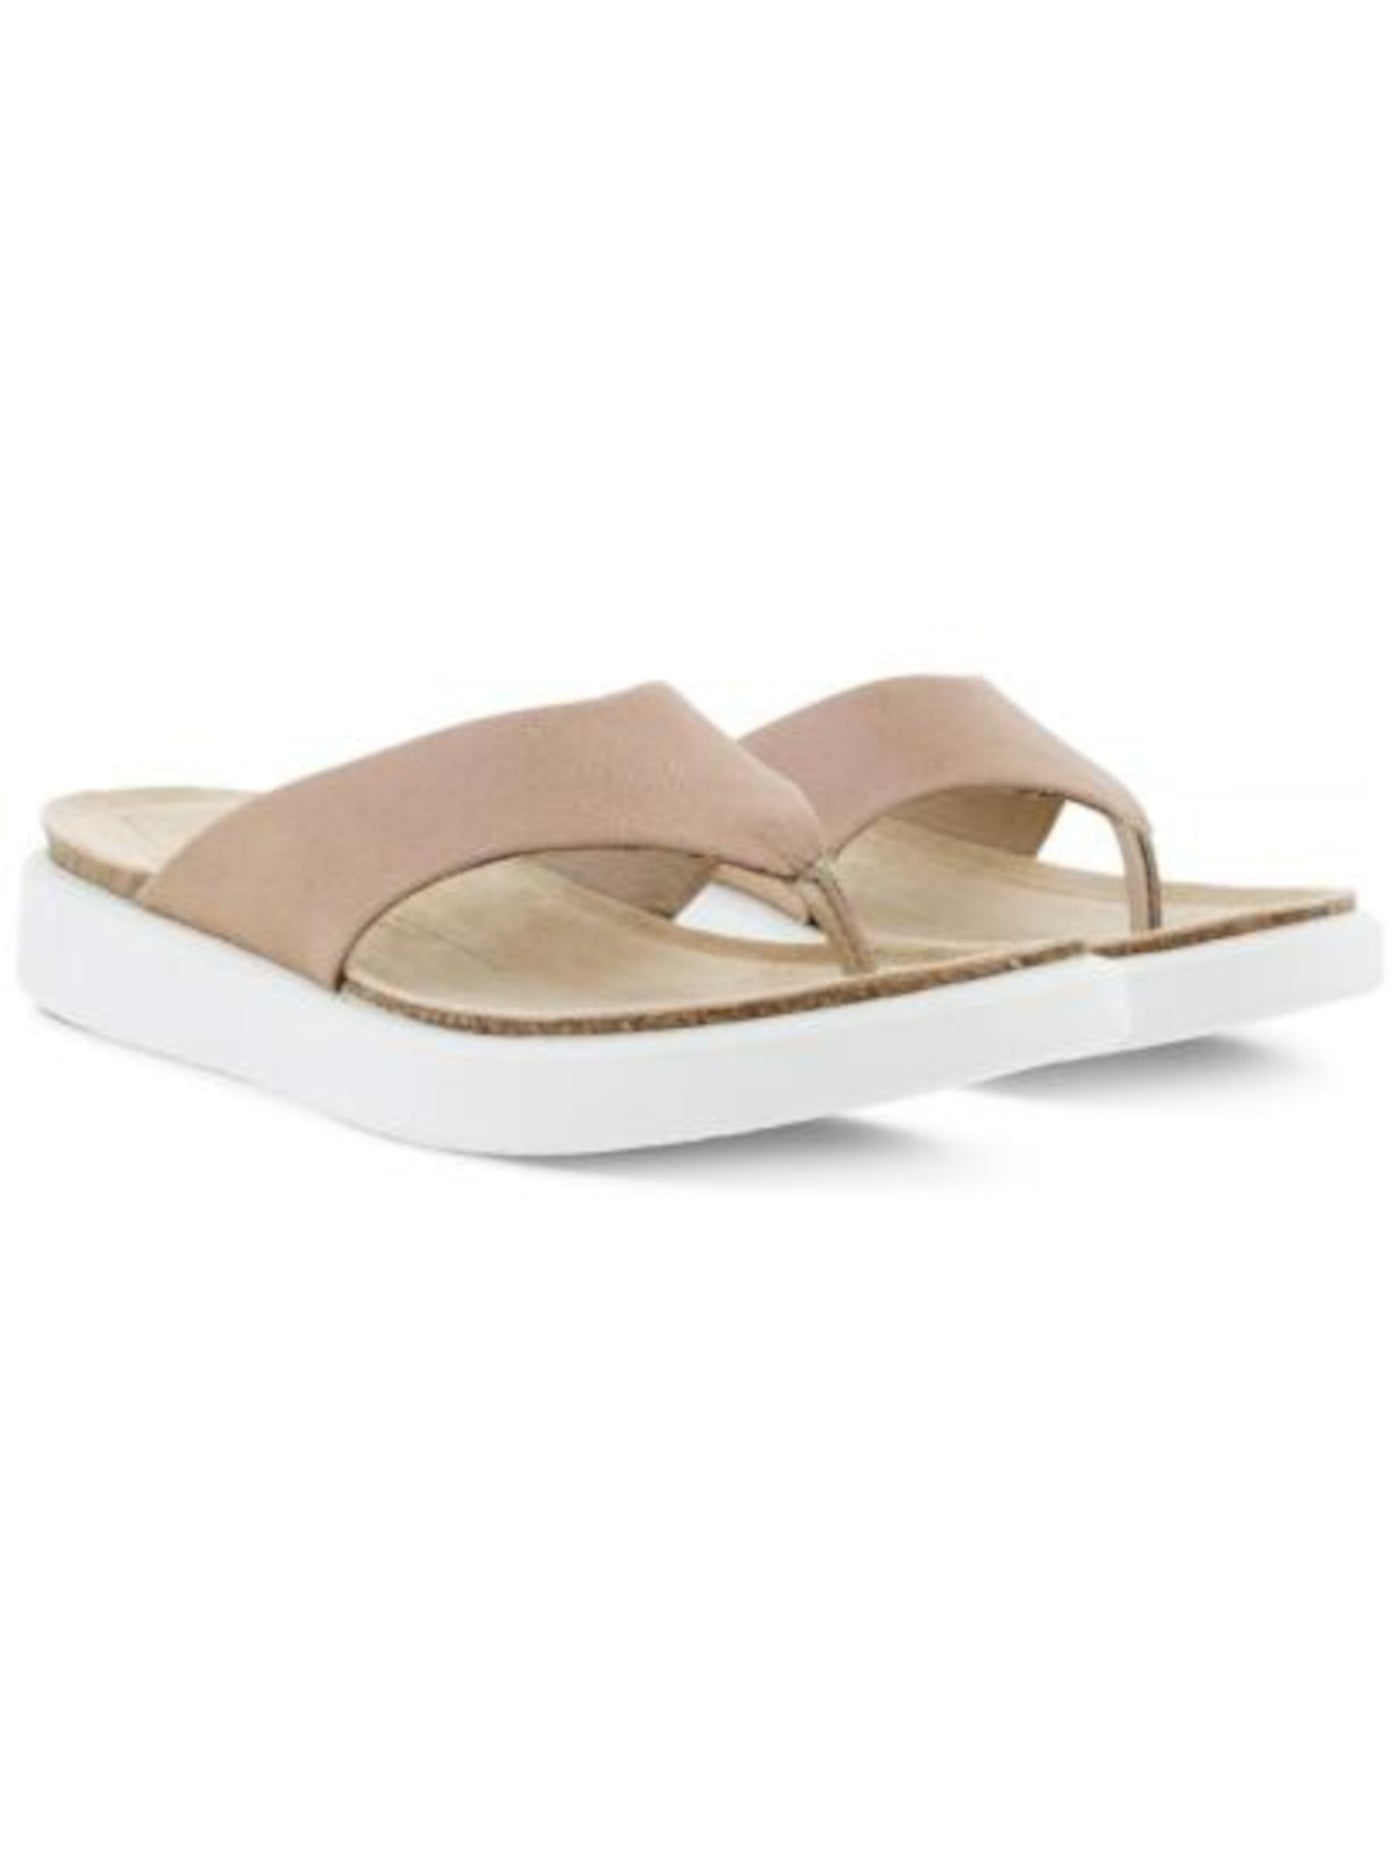 ECCO Womens Beige Arch Support Cushioned Round Toe Wedge Slip On Leather Thong Sandals Shoes 5-5,5